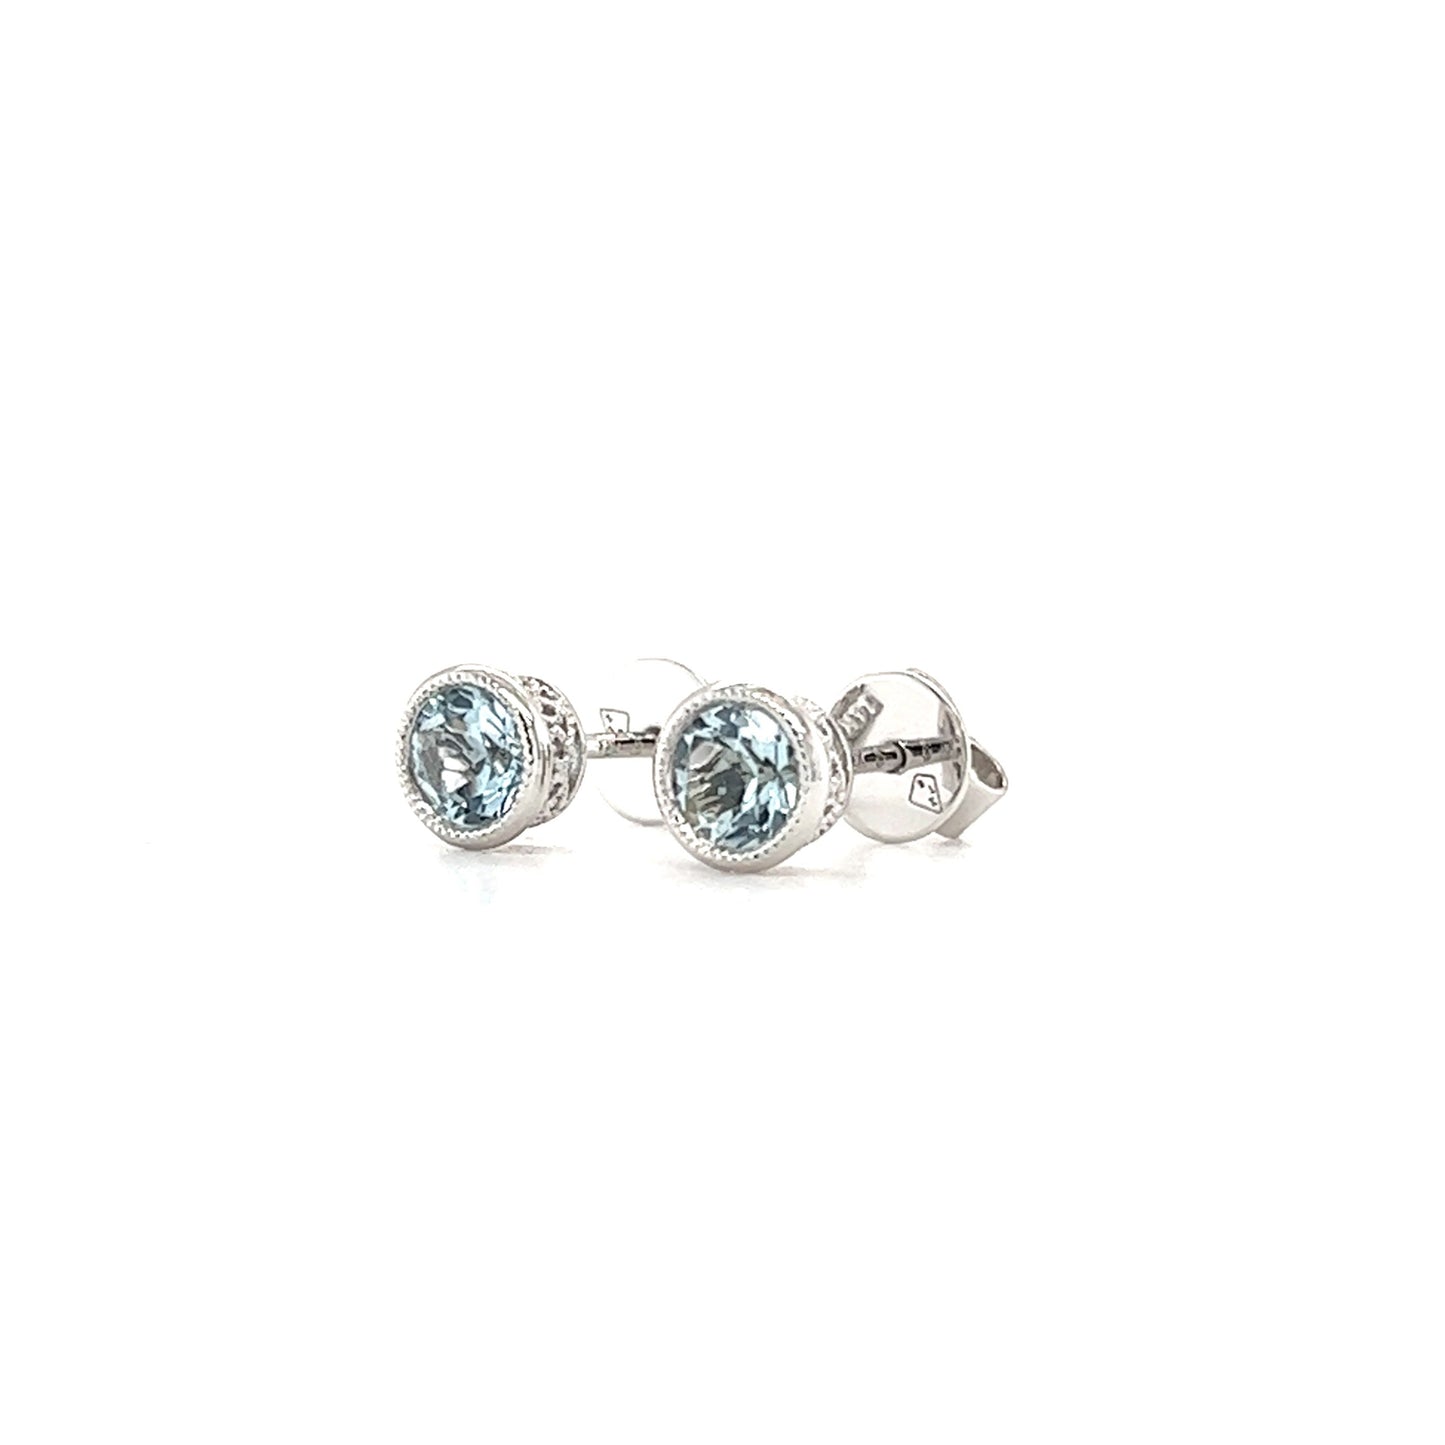 Round Aquamarine Stud Earrings with Filigree and Milgrain in 14K White Gold Right Side View